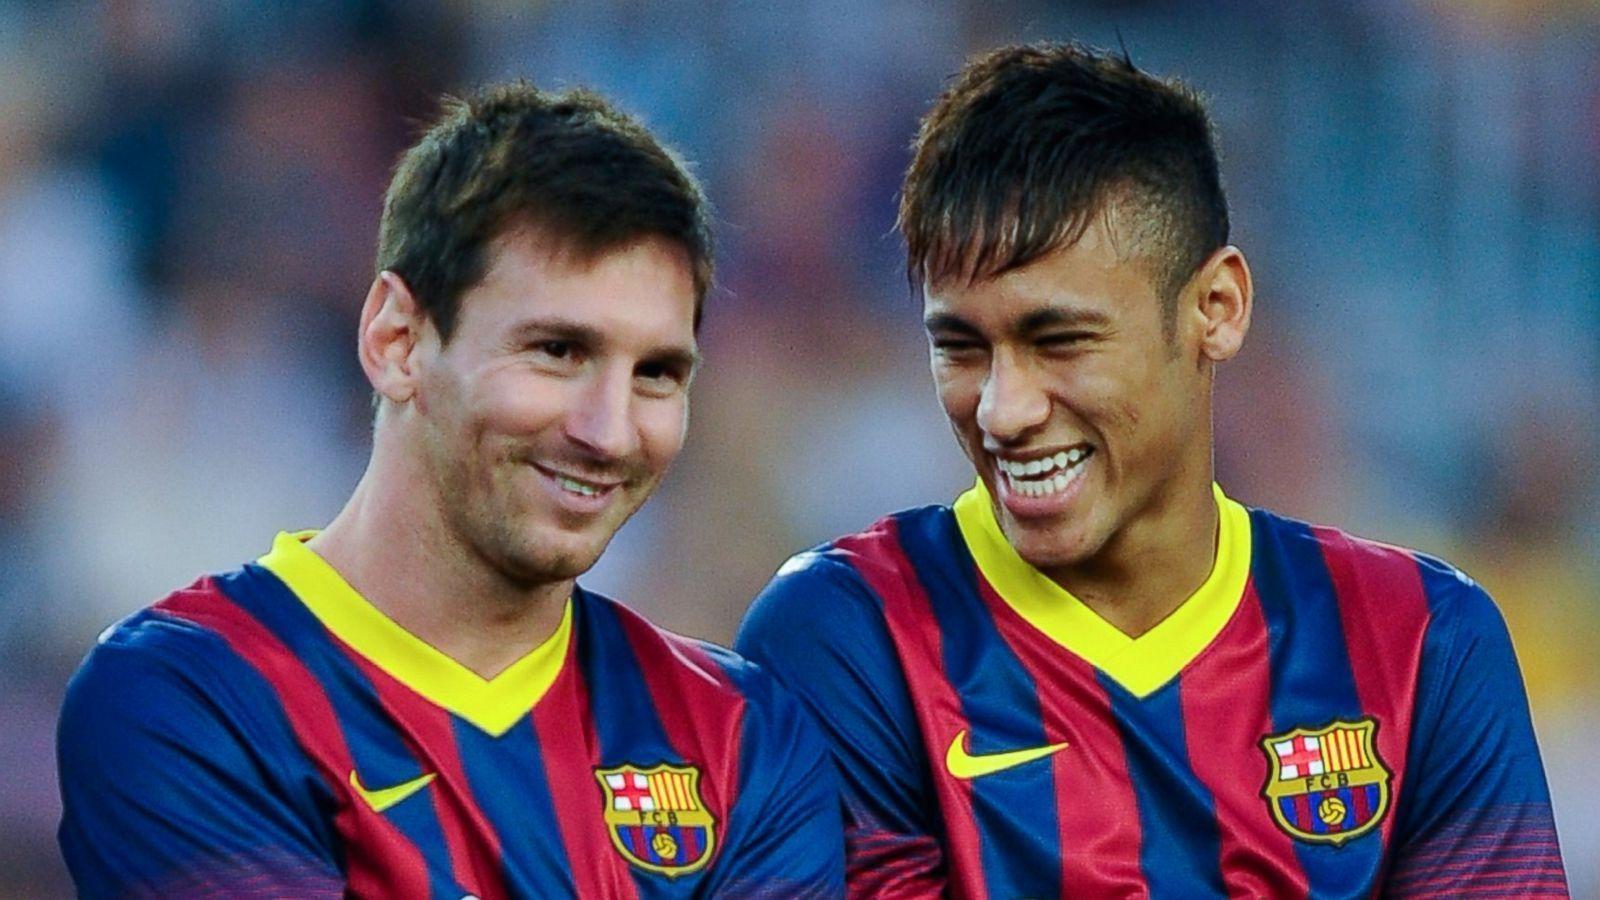 Barcelona team mate, Neymar And Messi 2014 in high resolution